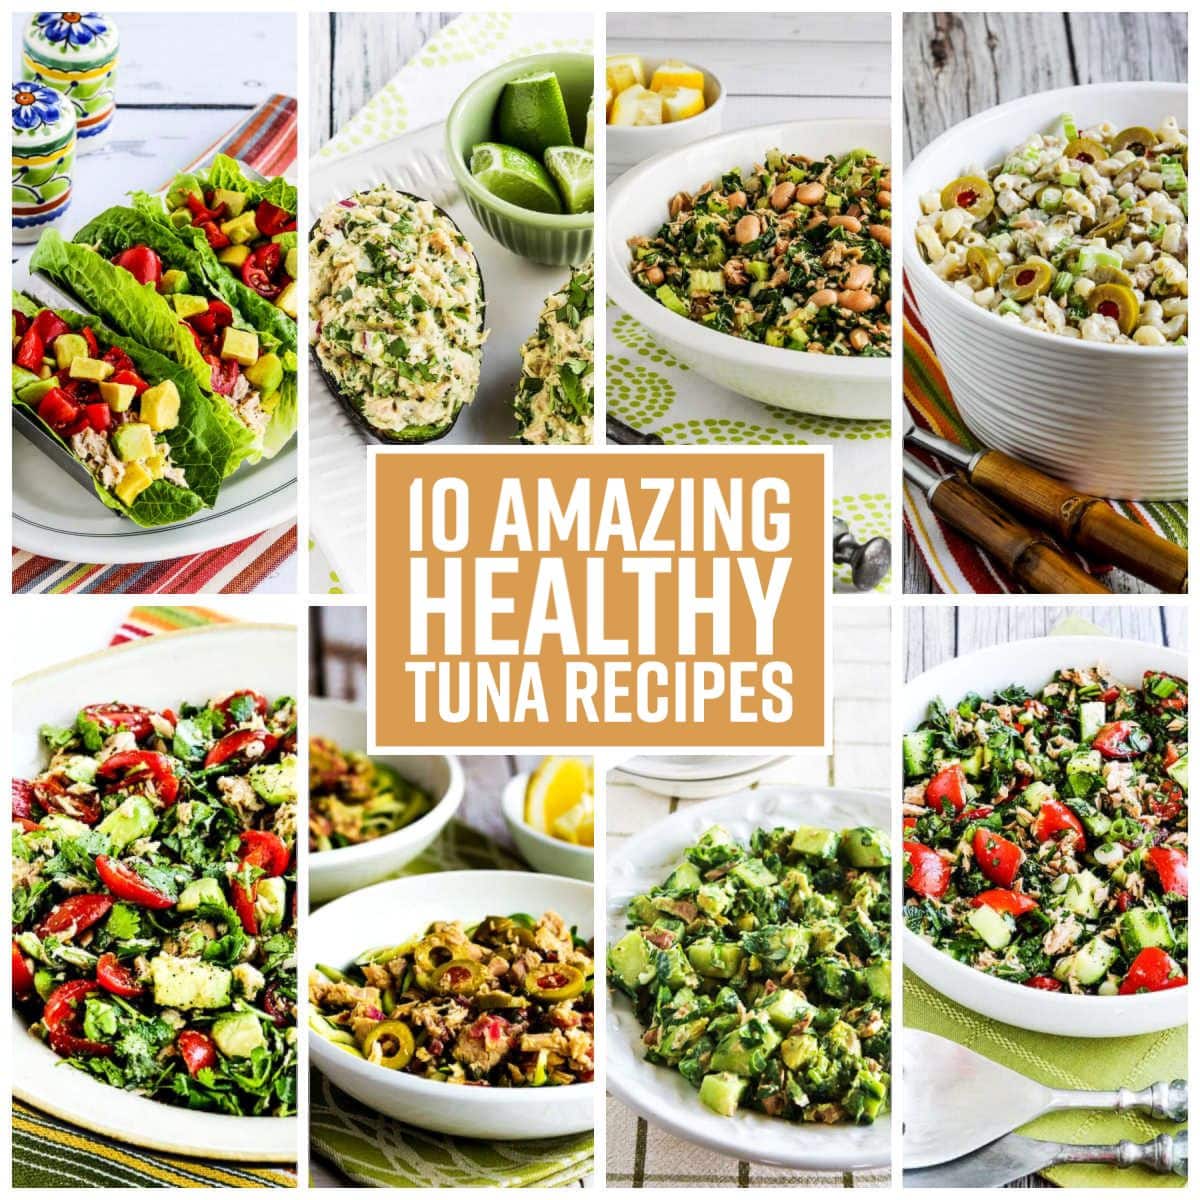 10 Amazing Healthy Tuna Recipes text overlay collage of featured recipes.